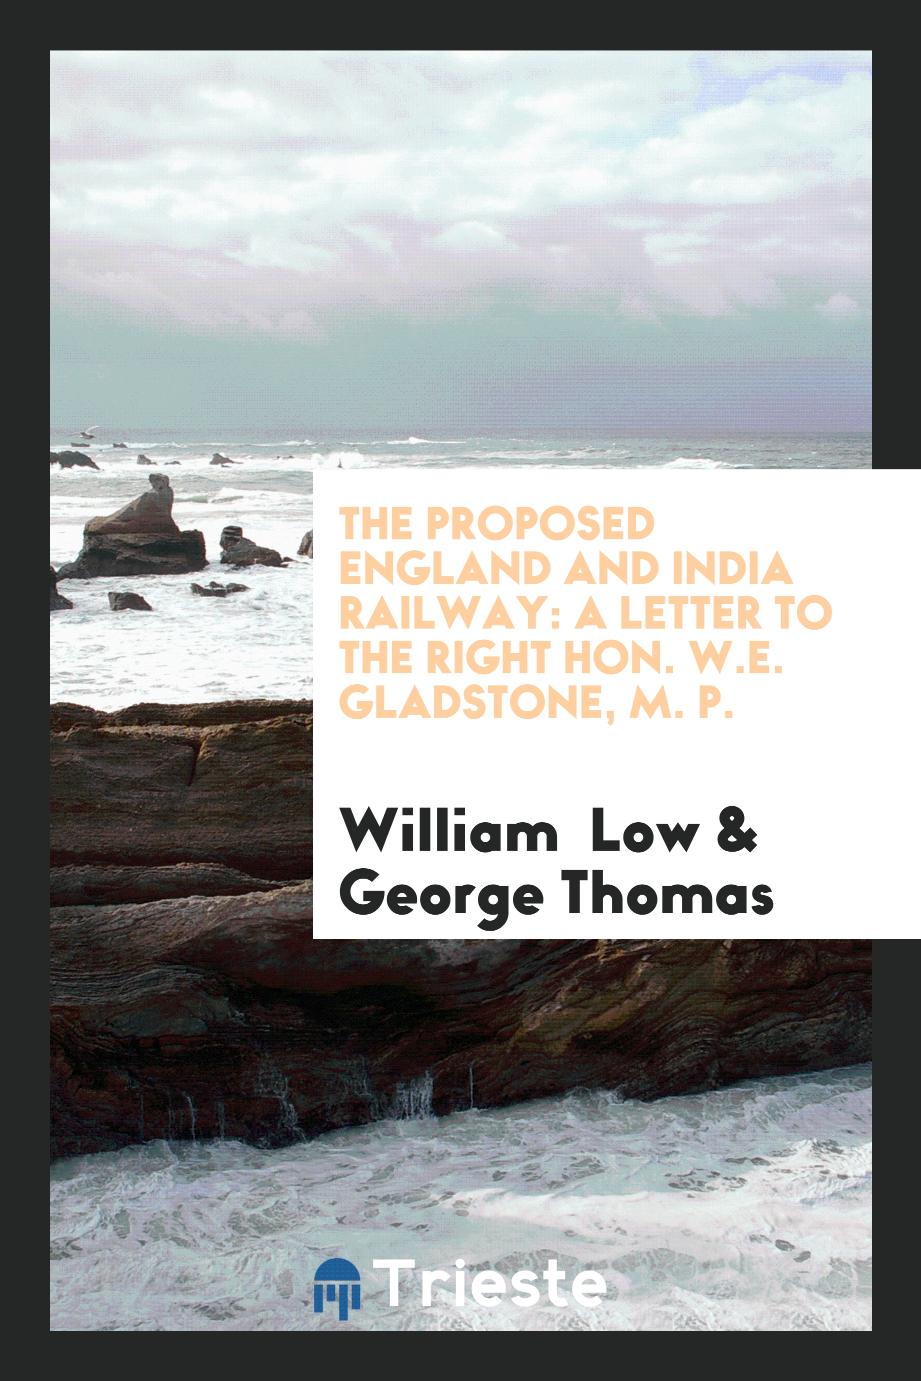 William  Low, George Thomas - The Proposed England and India Railway: A Letter to the Right Hon. W.E. Gladstone, M. P.